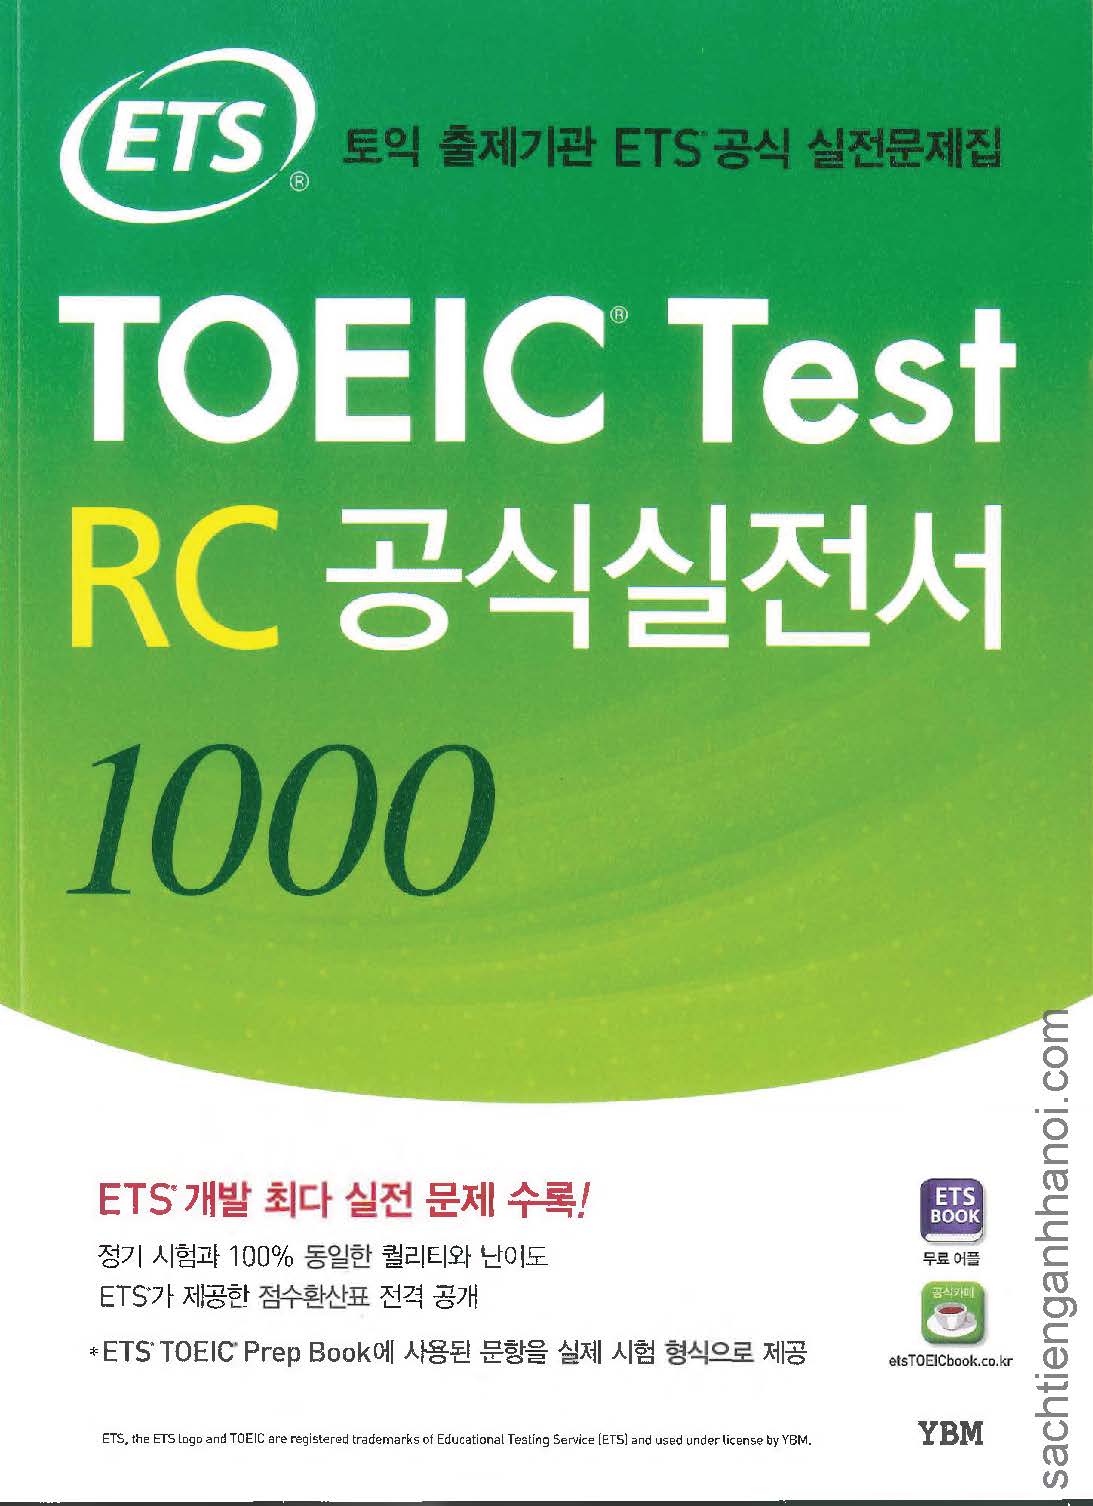 ETS TOEIC Test RC 1000